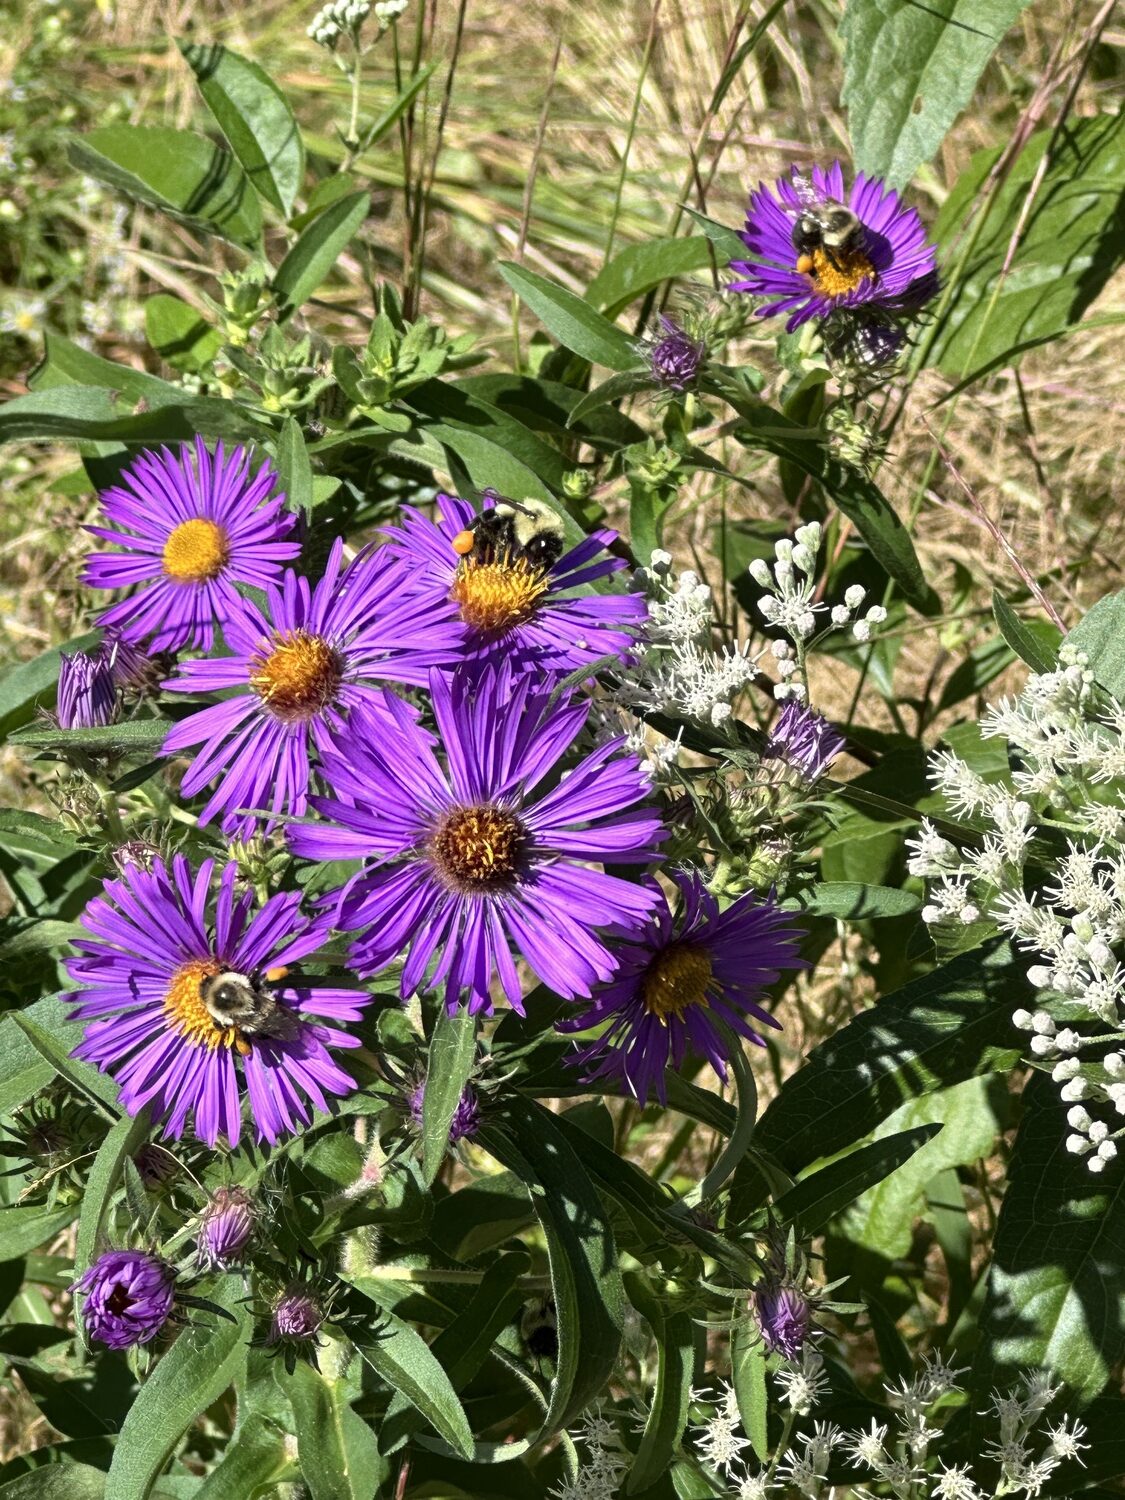 One of the many plants that will be available for purchase and planting is the New England aster – a bee’s best friend.